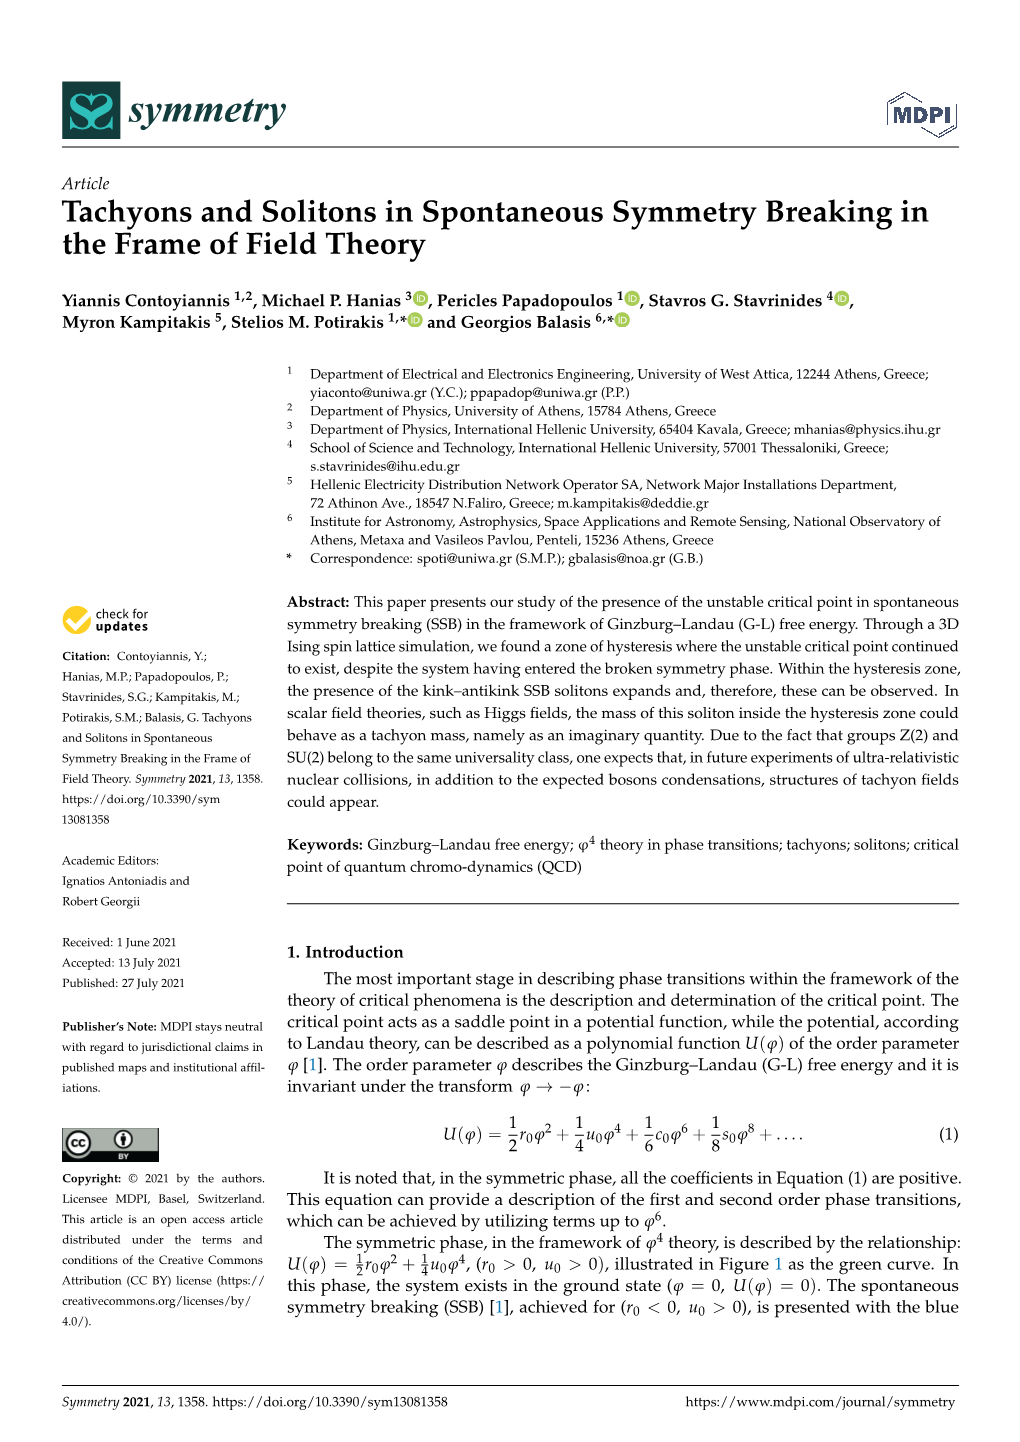 Tachyons and Solitons in Spontaneous Symmetry Breaking in the Frame of Field Theory